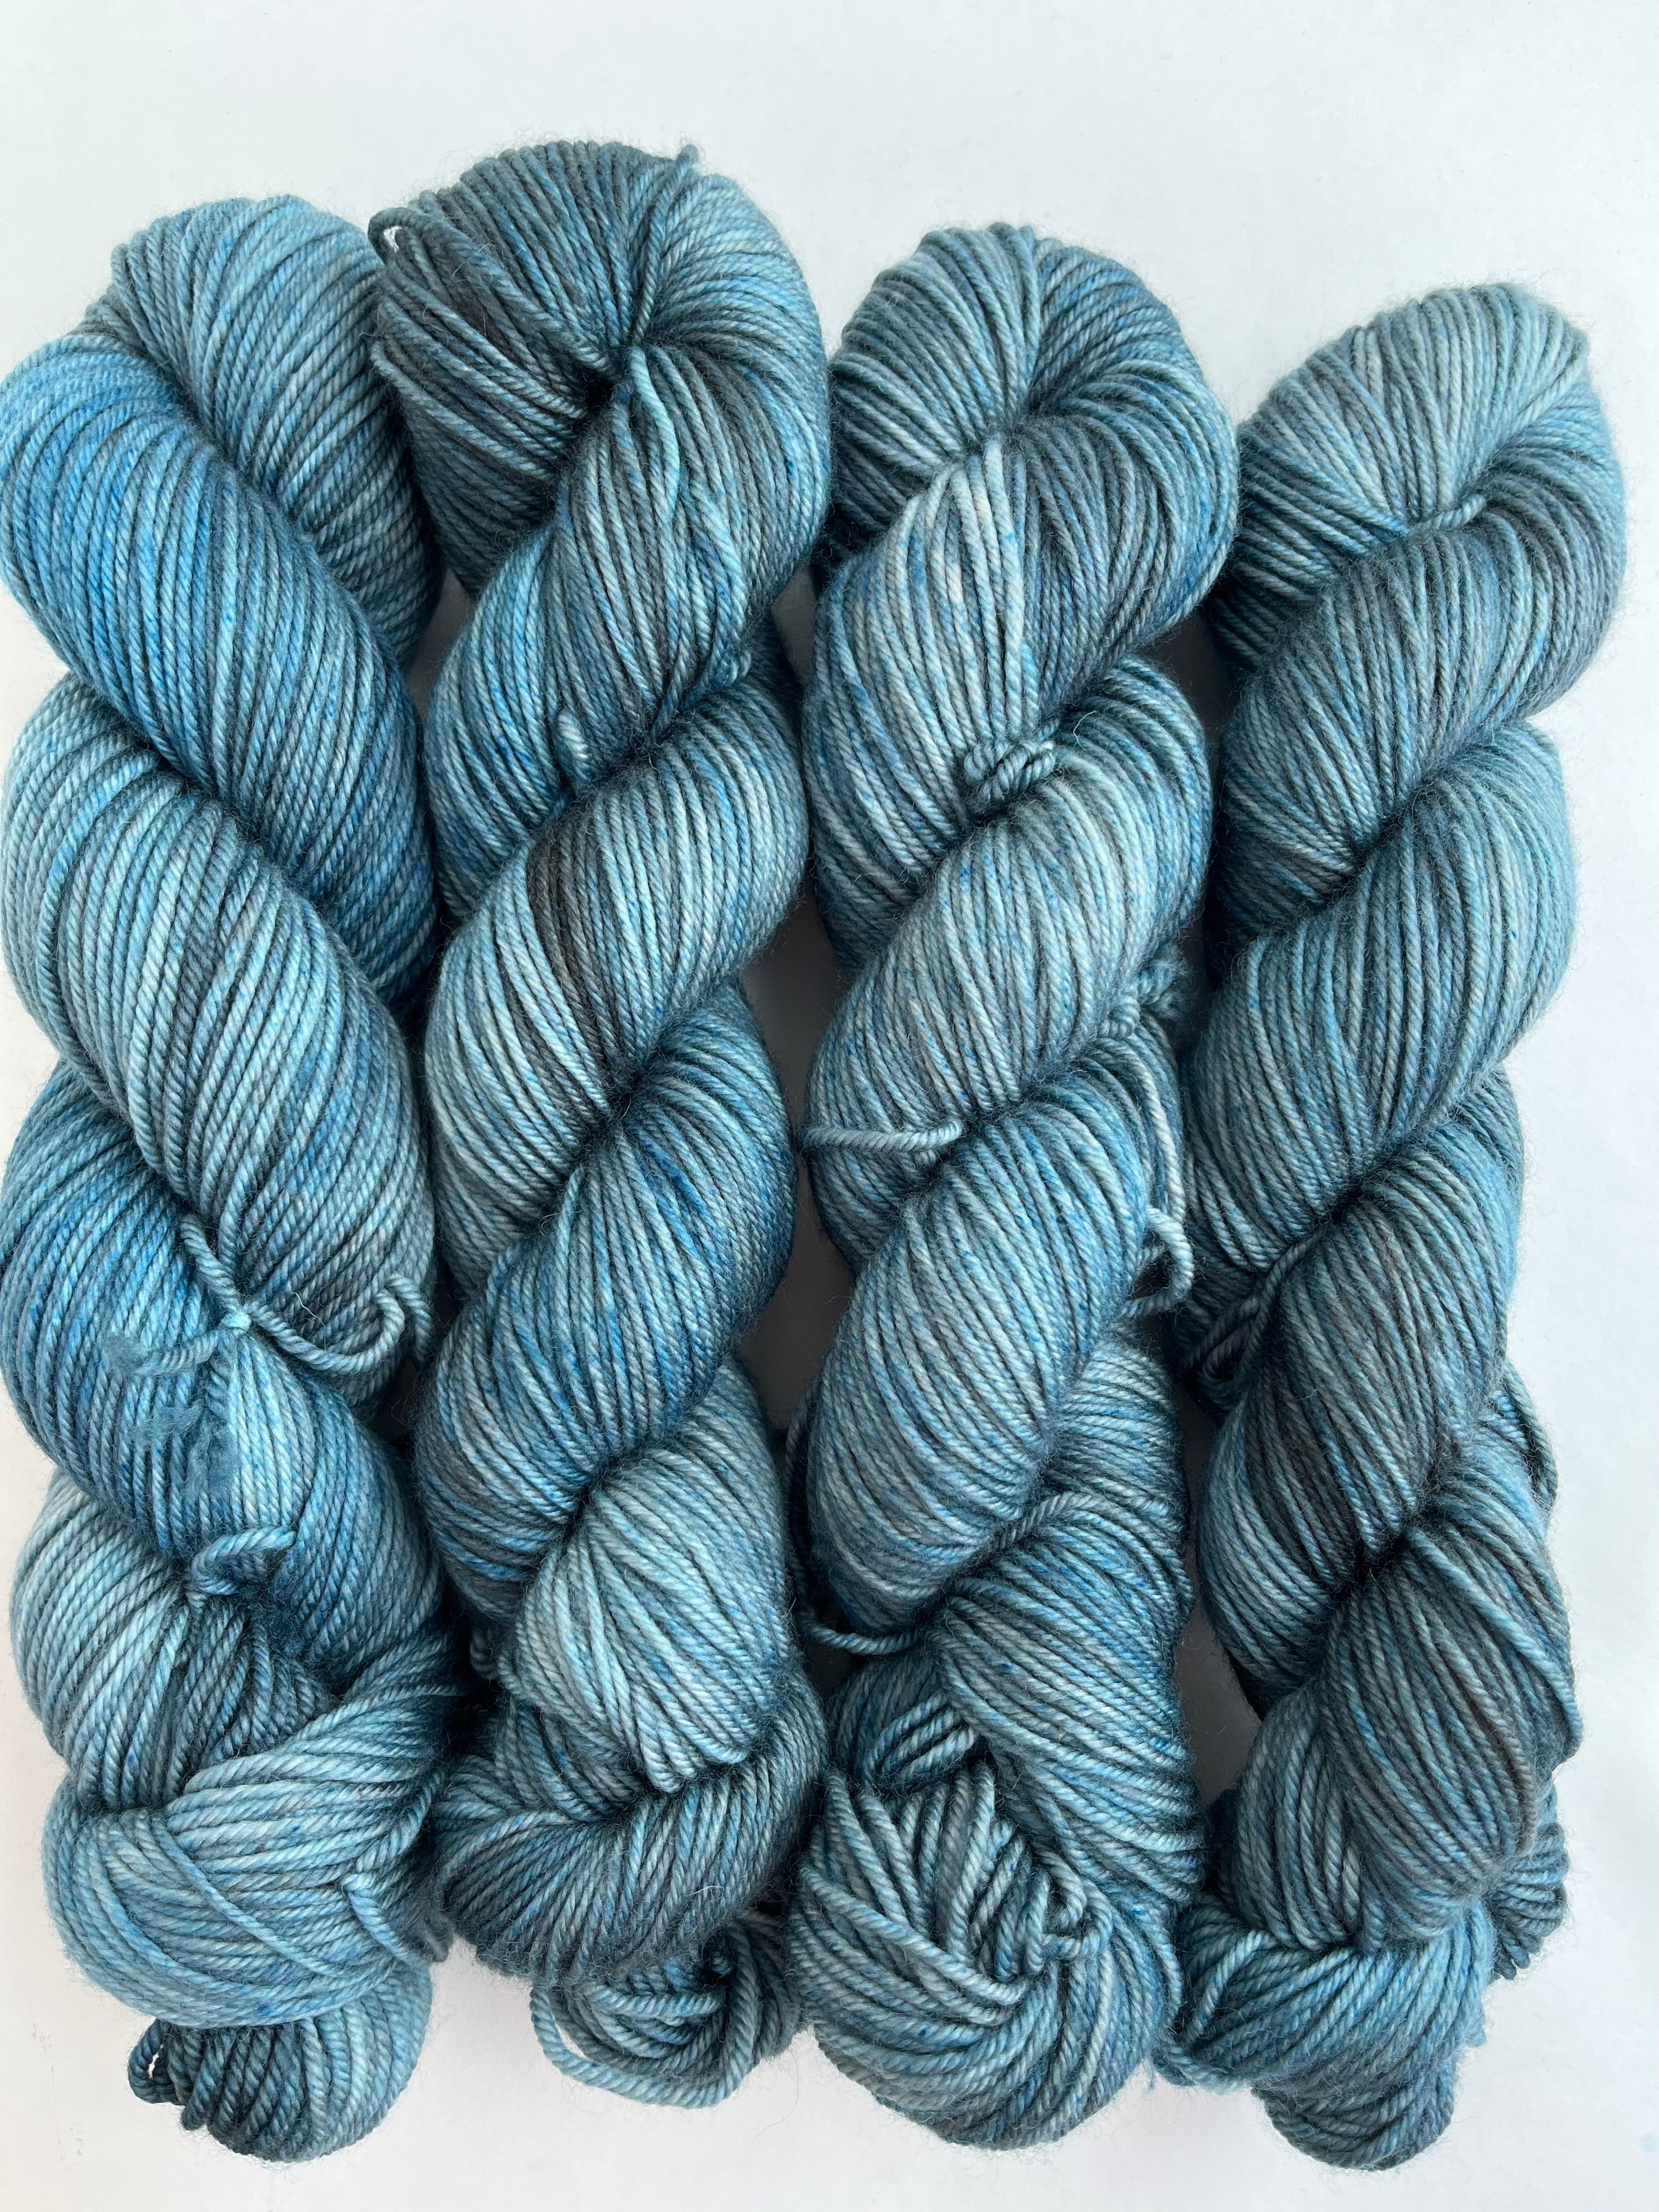 Tidal DK from Tributary Yarns